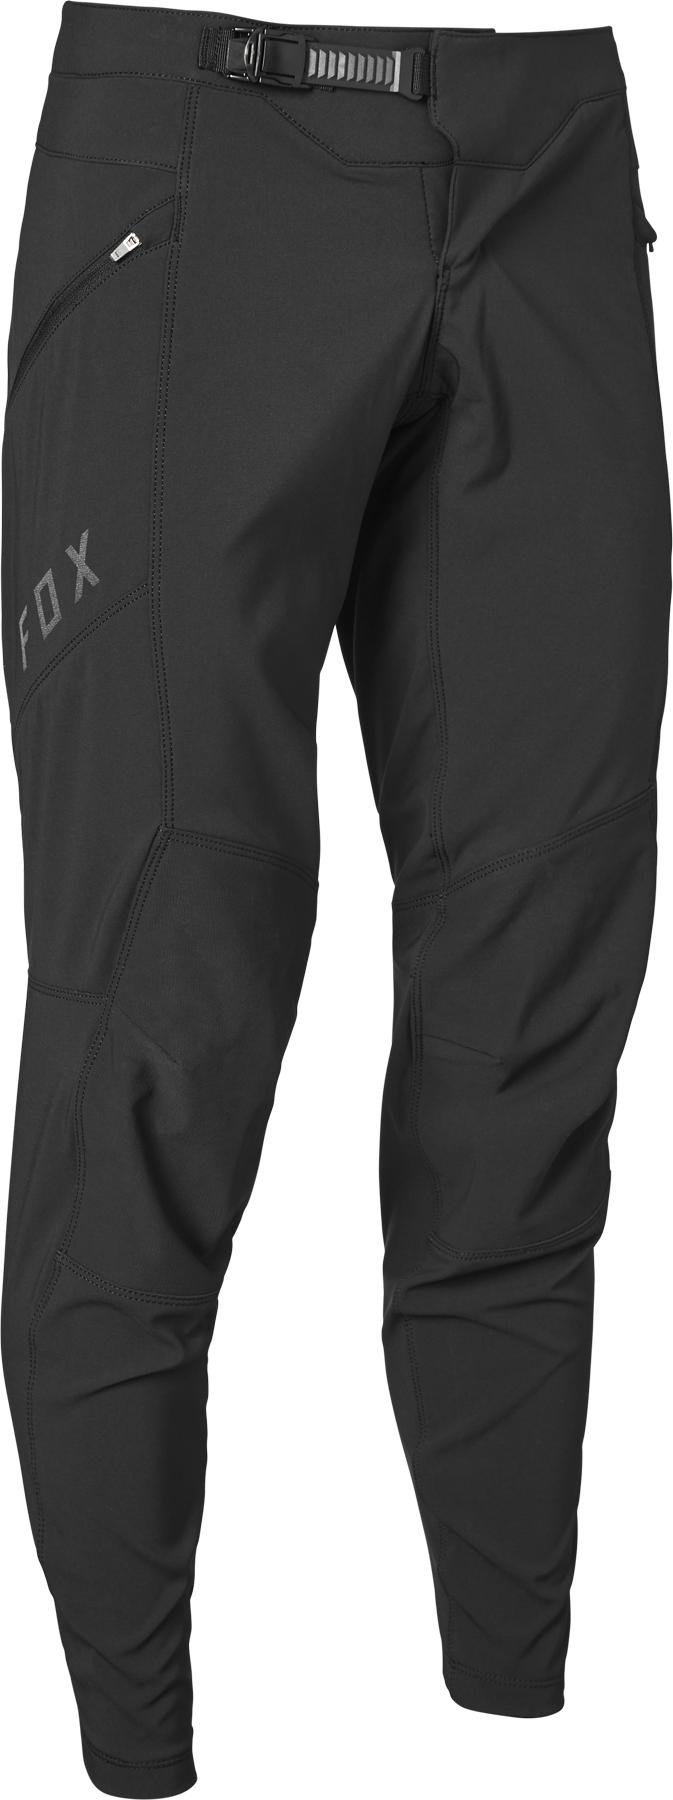 Fox Racing Womens Defend Fire Trousers - Black